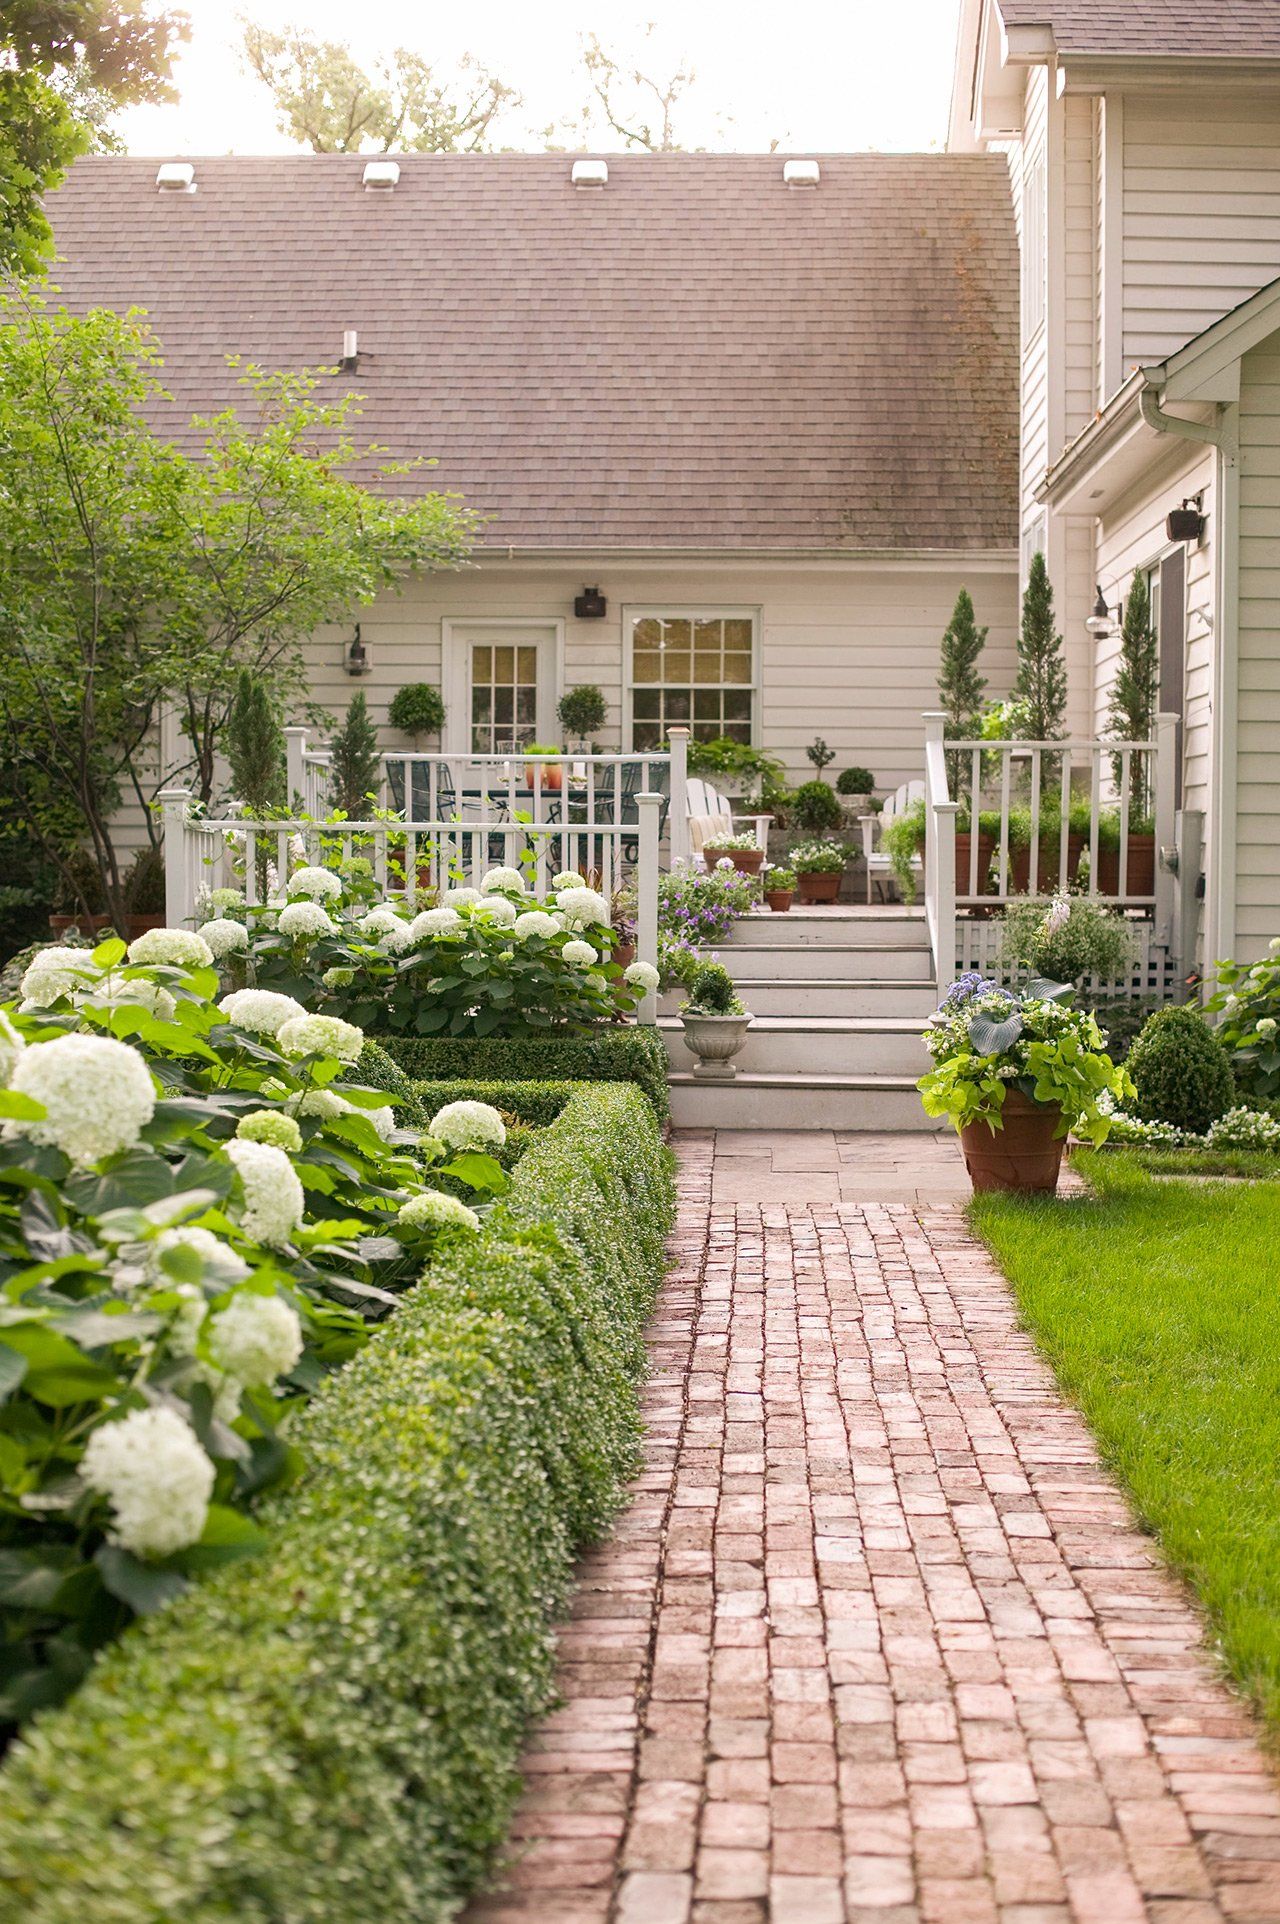 A Charming Garden adorns the Front of the House